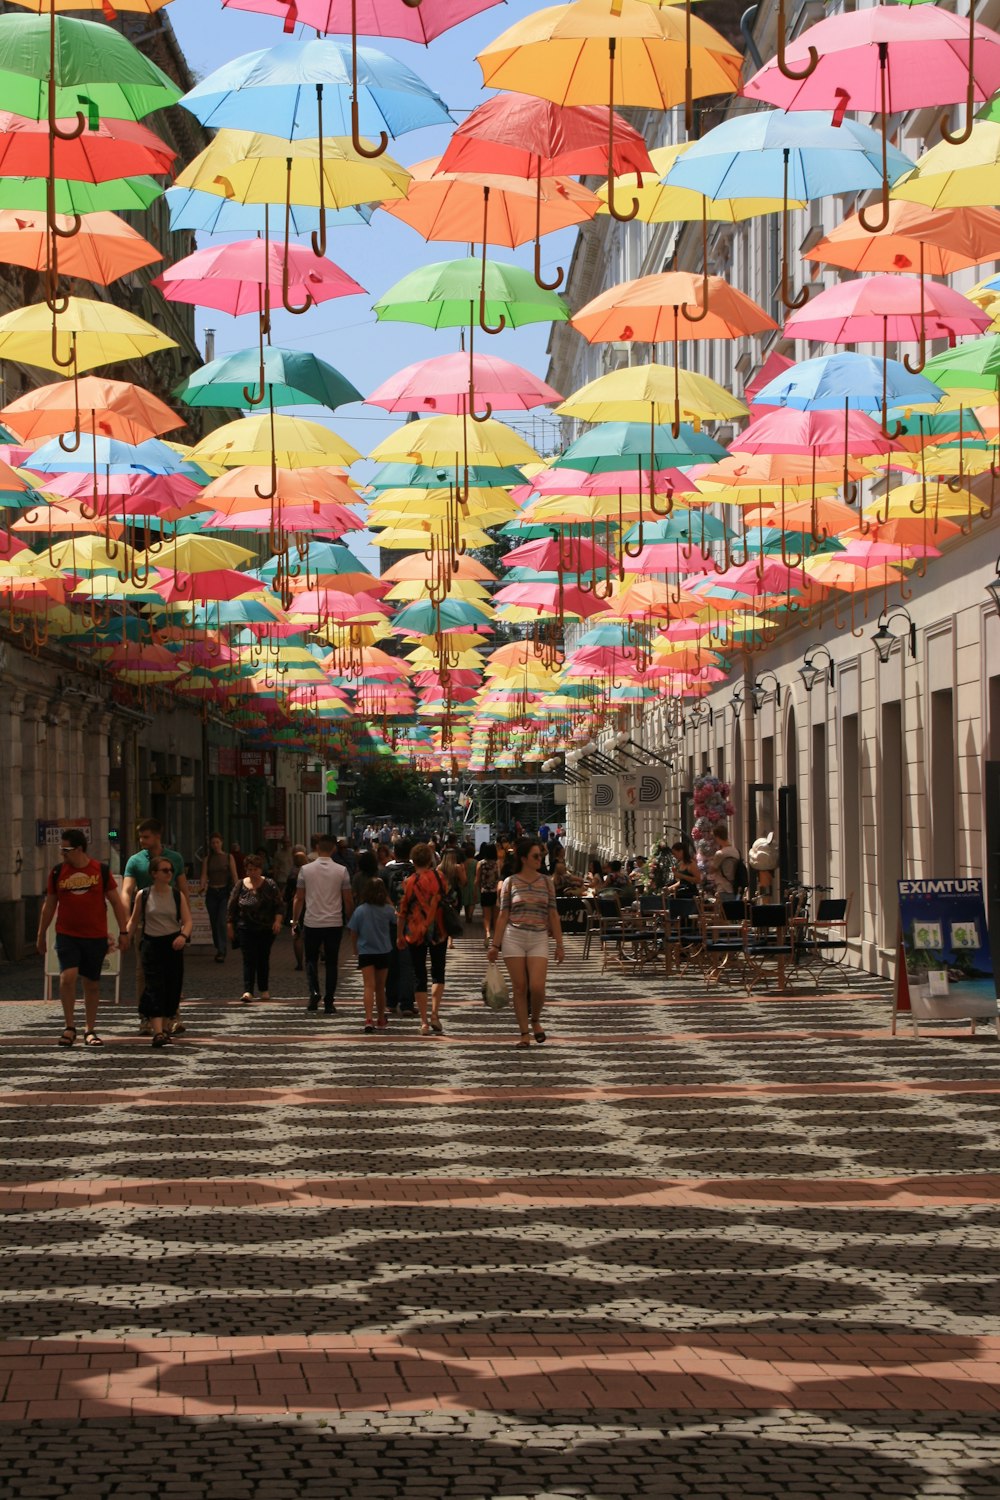 a group of people walking down a street under colorful umbrellas